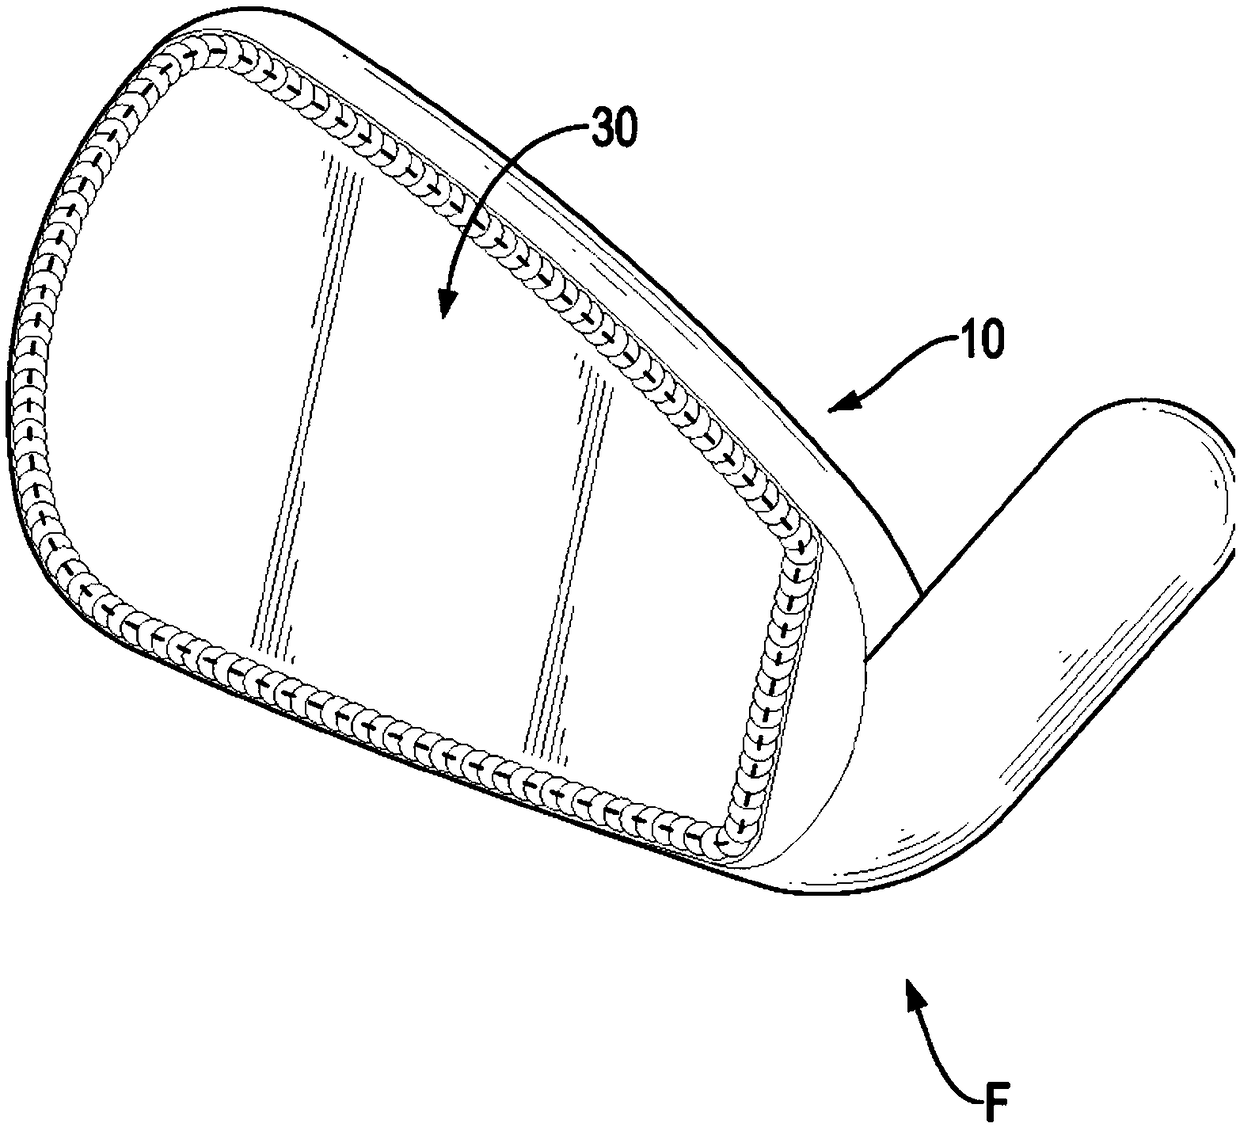 An integrally forged iron golf club head and its manufacturing method